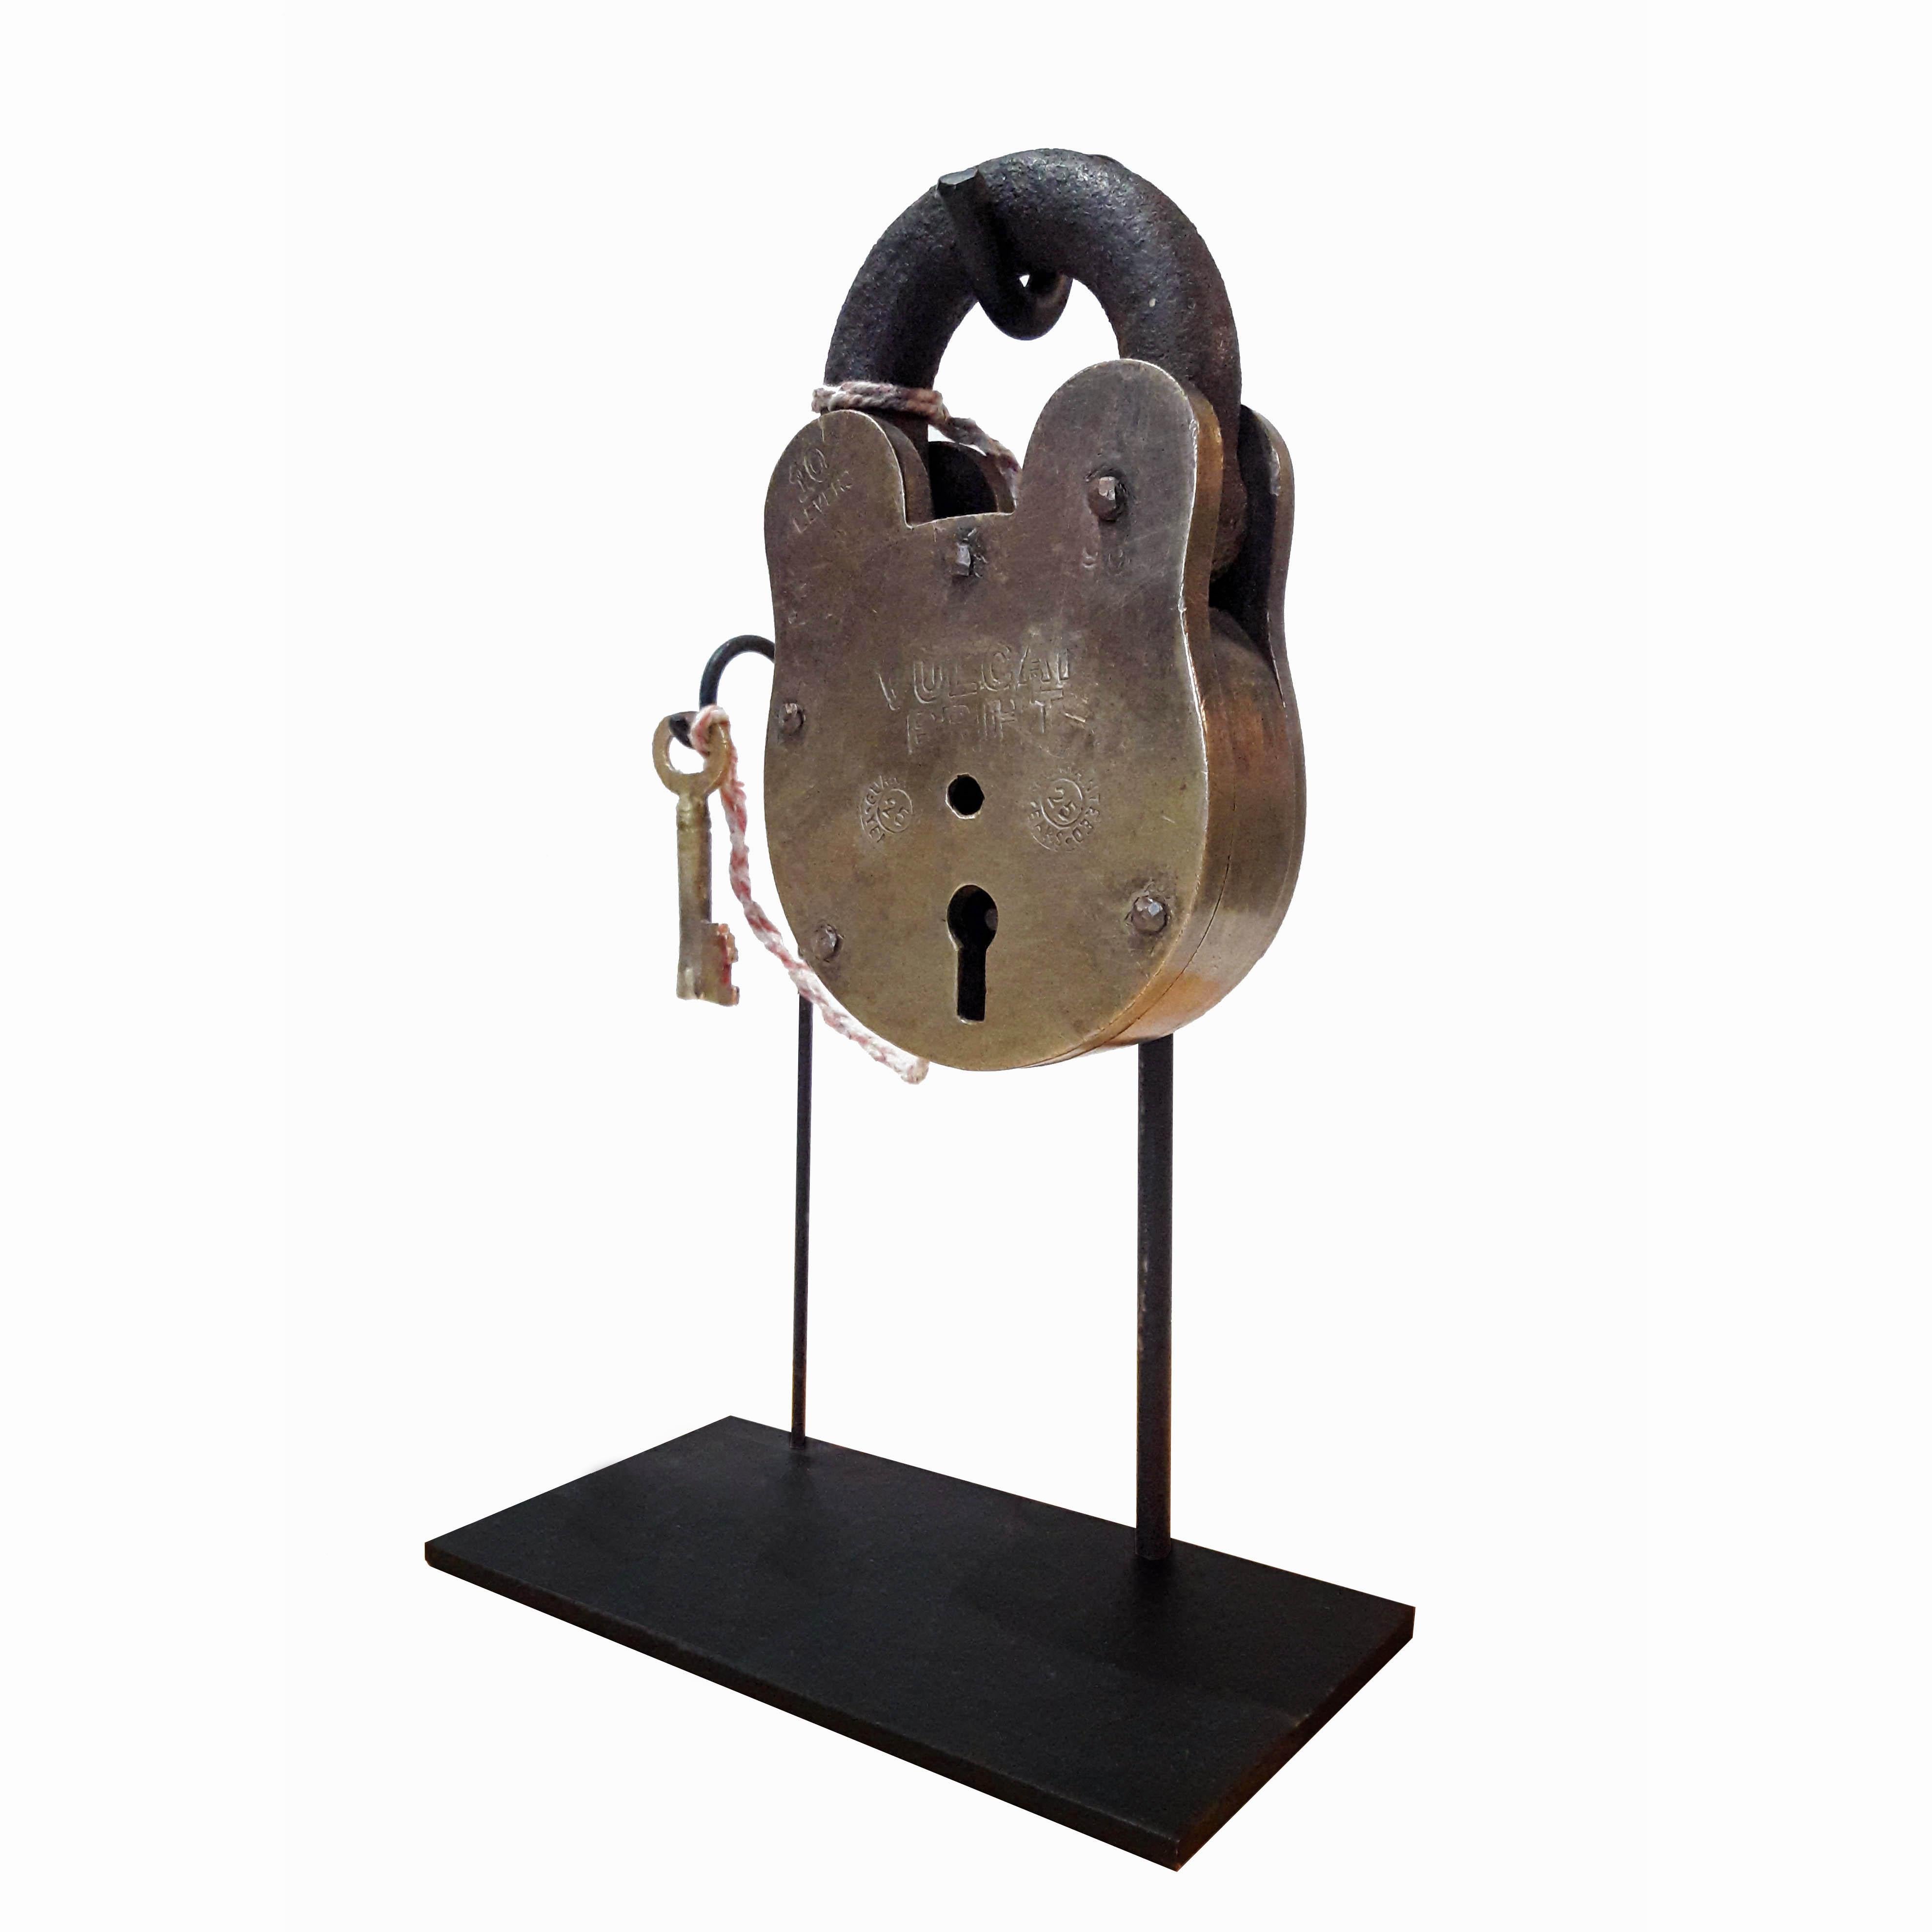 A large padlock hand-cast in solid brass and iron. Early 20th century.
From the Vulcan Bright maker, it has copper rivets and 10 levers. 
Comes with original skeleton key. Sold as a decorative / collector's item, but the padlock is fully